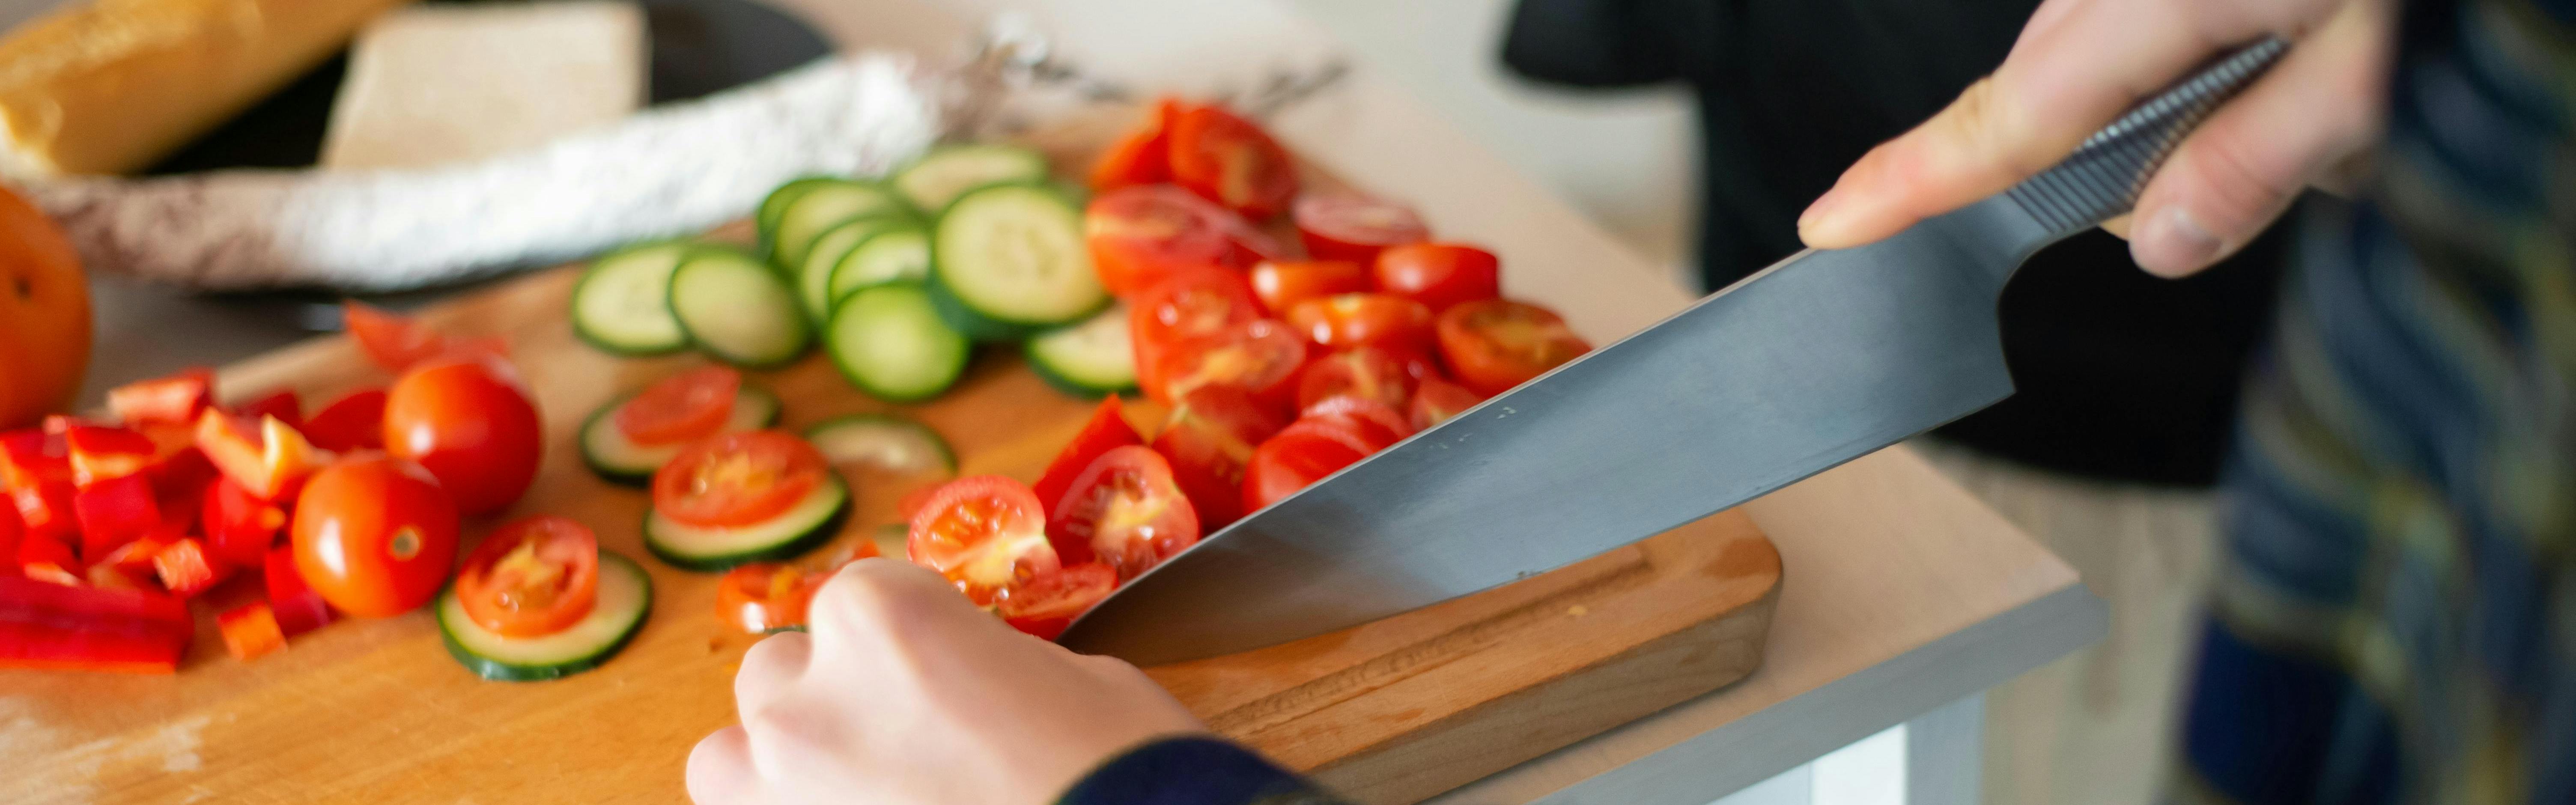 An at-home chef uses a knife to slice tomatoes and cucumber on a cutting board.